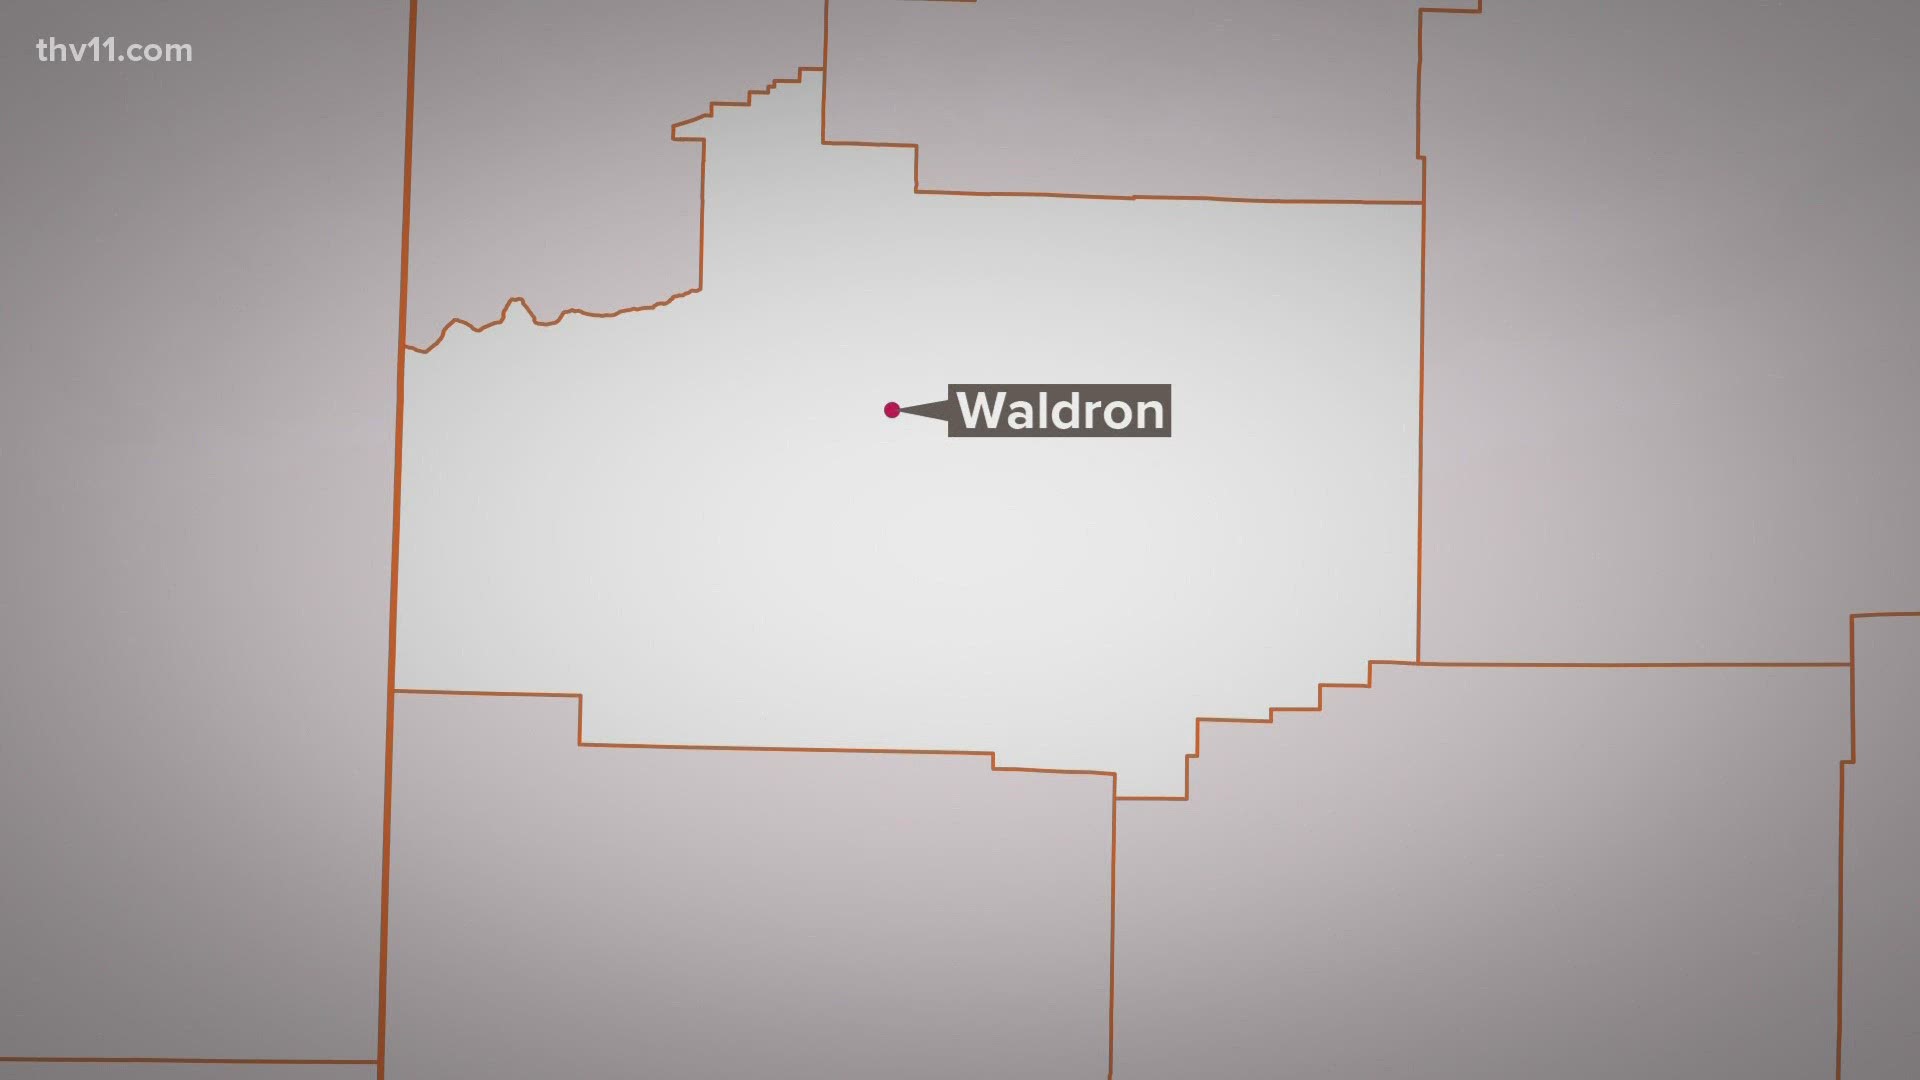 Arkansas State Police say they found two people dead inside a bedroom in south Waldron after receiving a call for help.